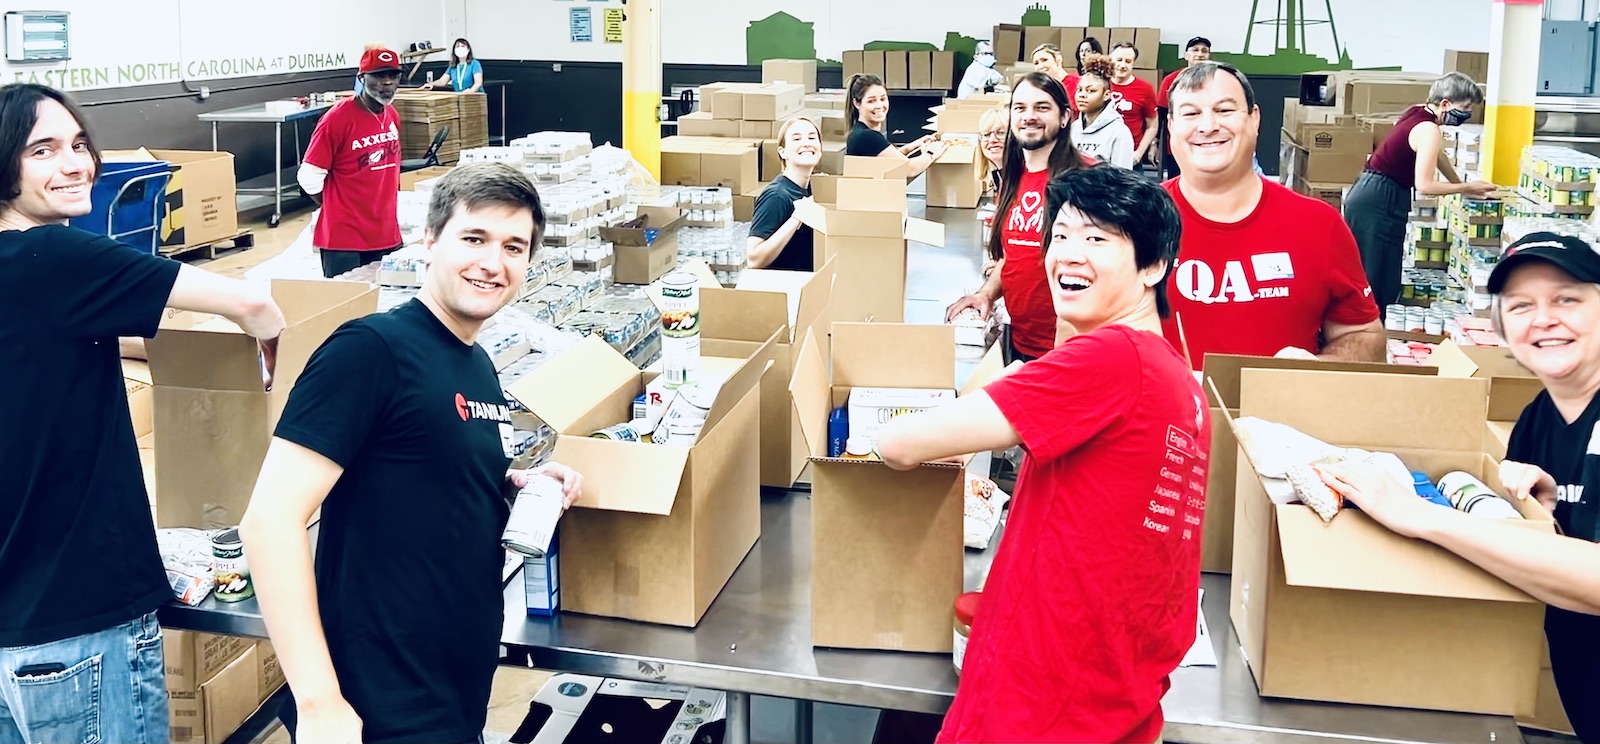 blog featured image. Tanium team at the food bank